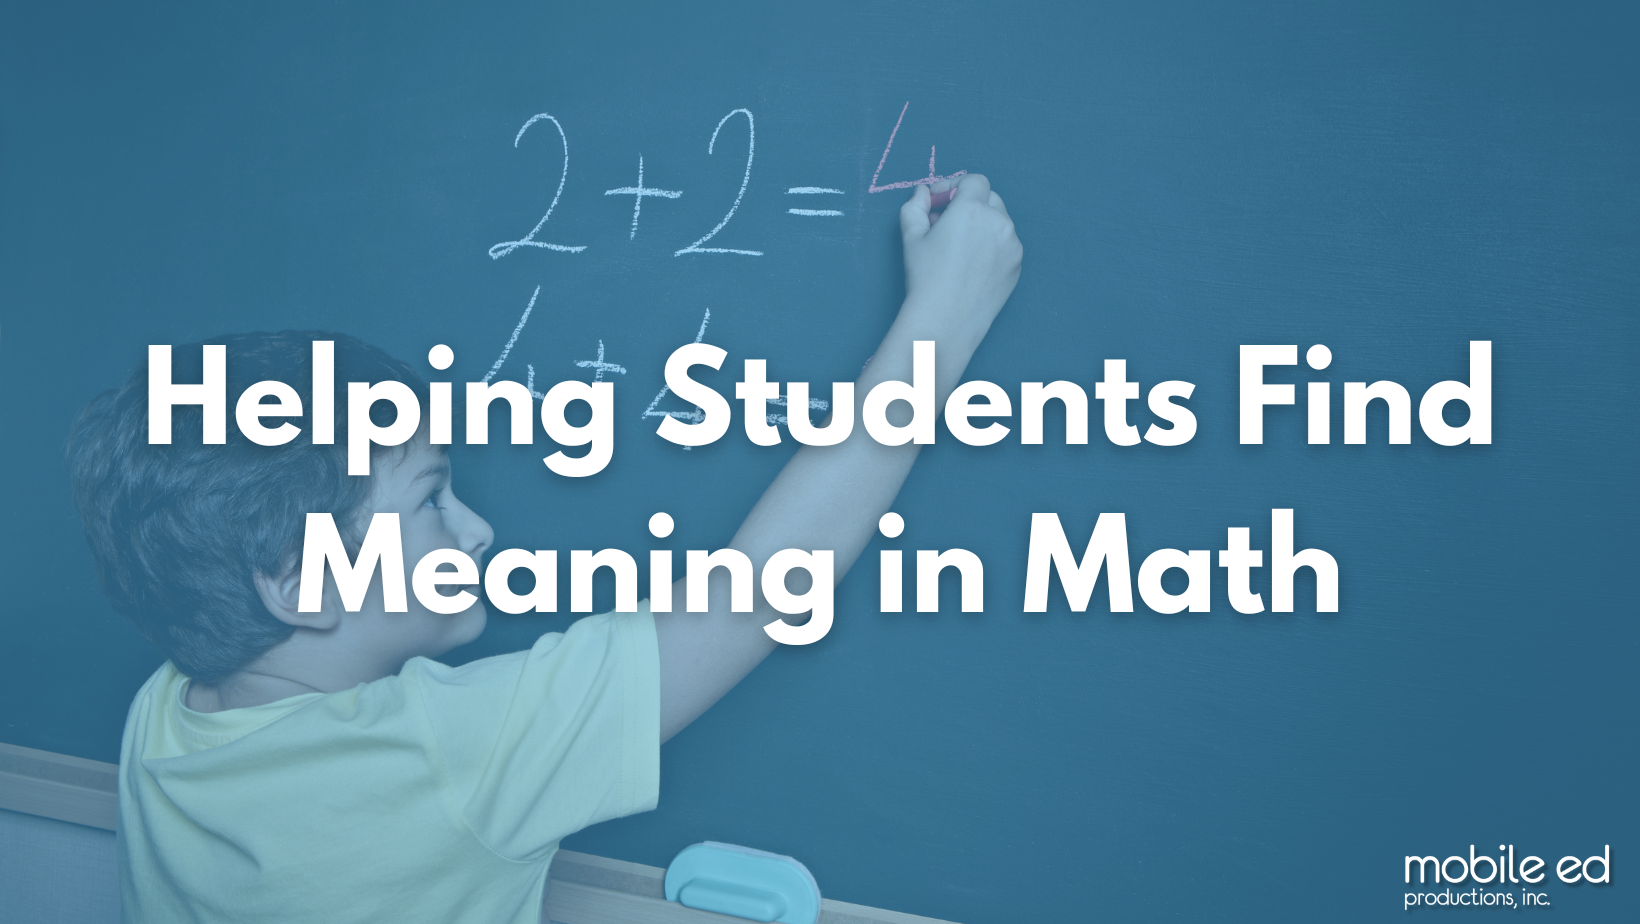 Helping Students Find Meaning in Math